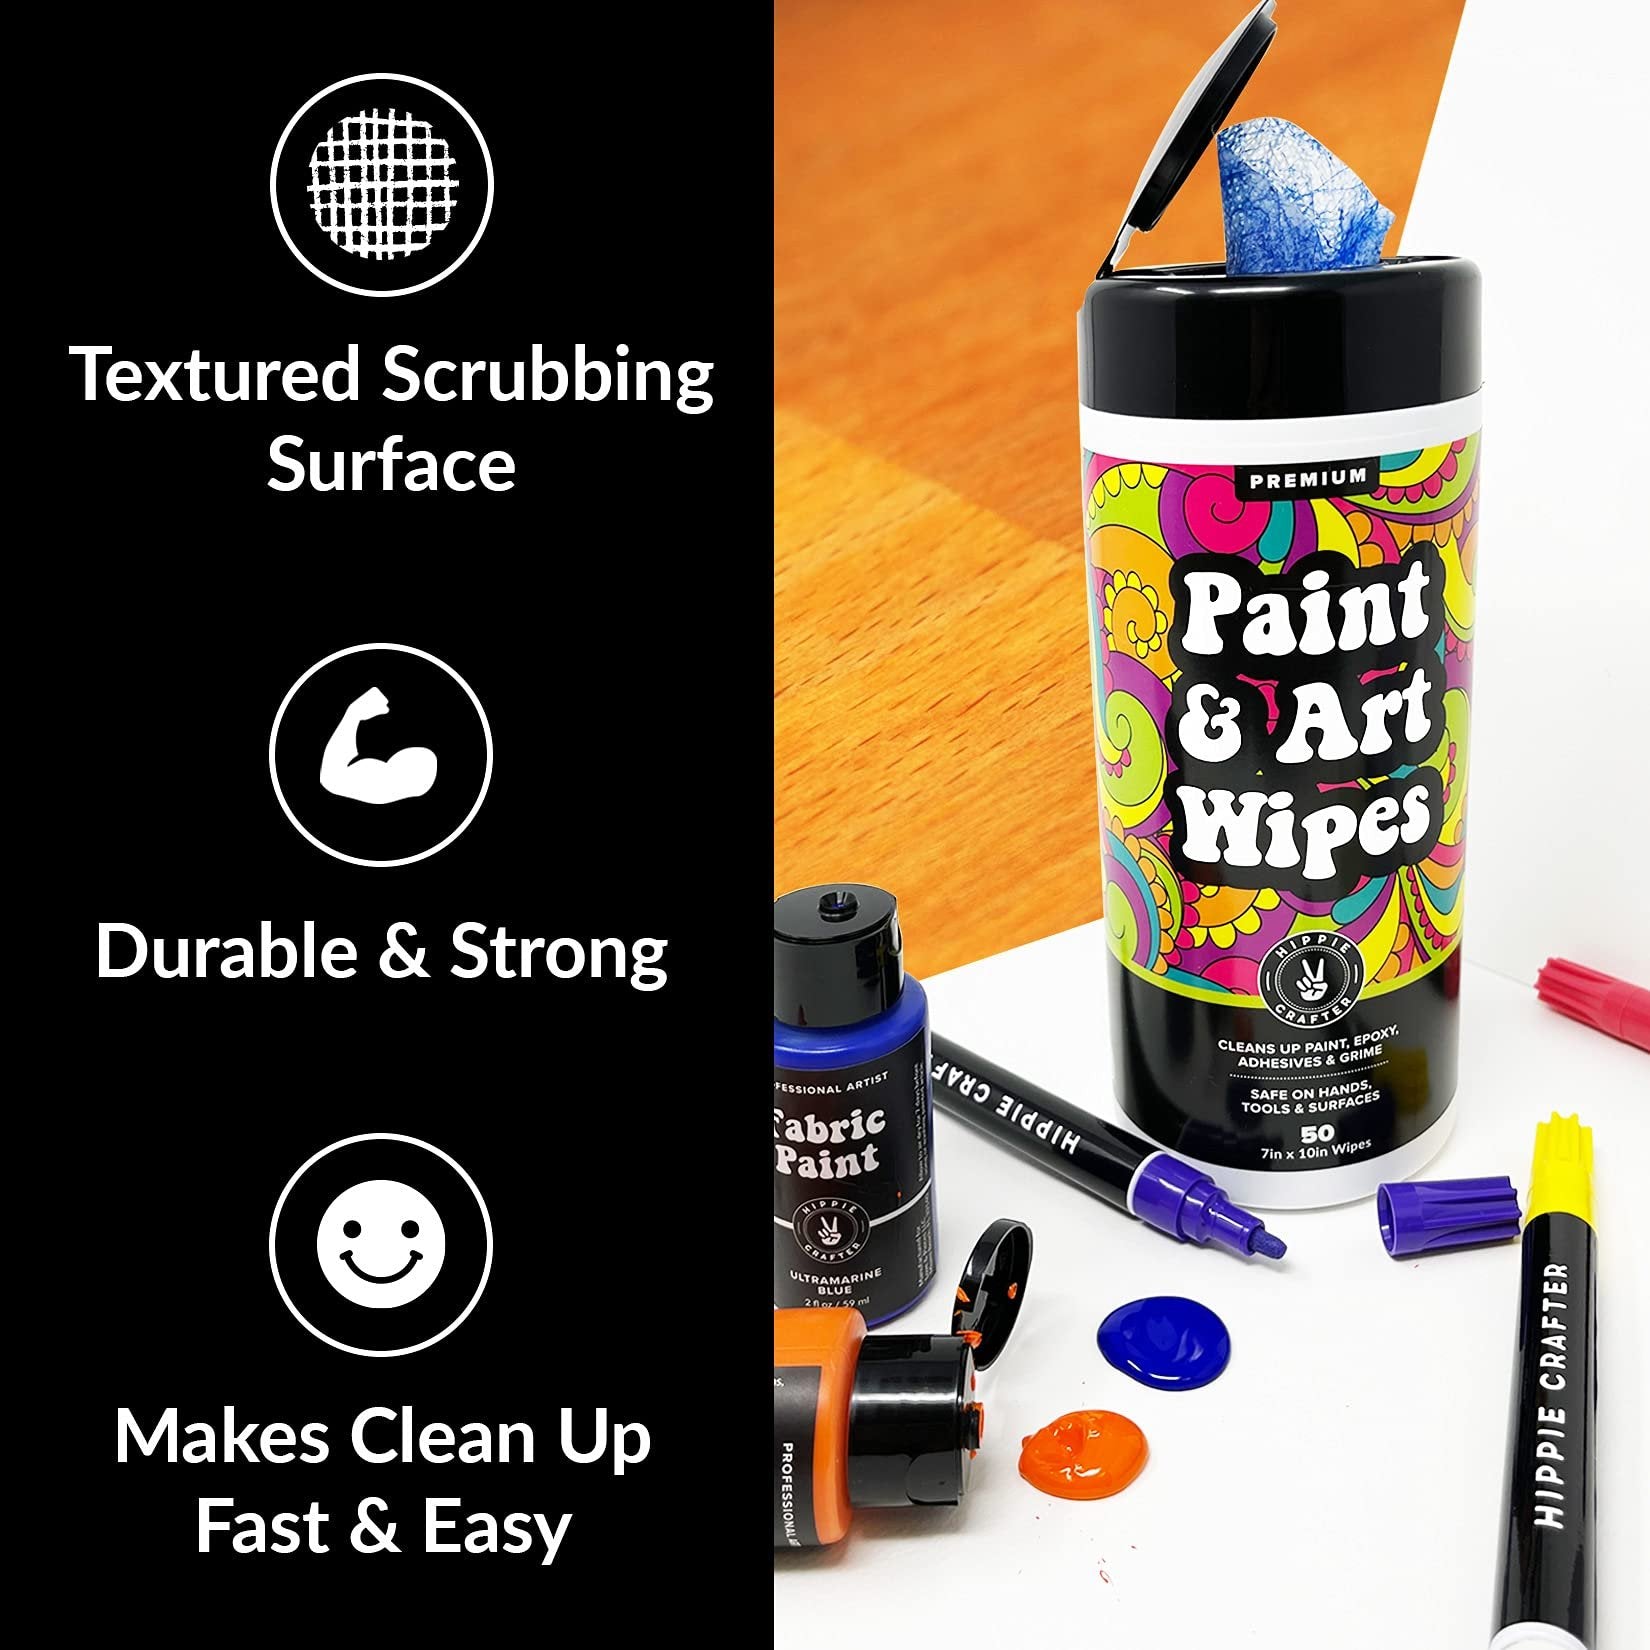 Paint & Art Wipes Paint Remover Wipes Cleaner Epoxy Glue Stains Latex, Acrylic Hand Cleaner and Plastic, Metal or Wood Surfaces, Floors, Brushes, Flat Paint Heavy Duty Cleaning (100 Pcs)